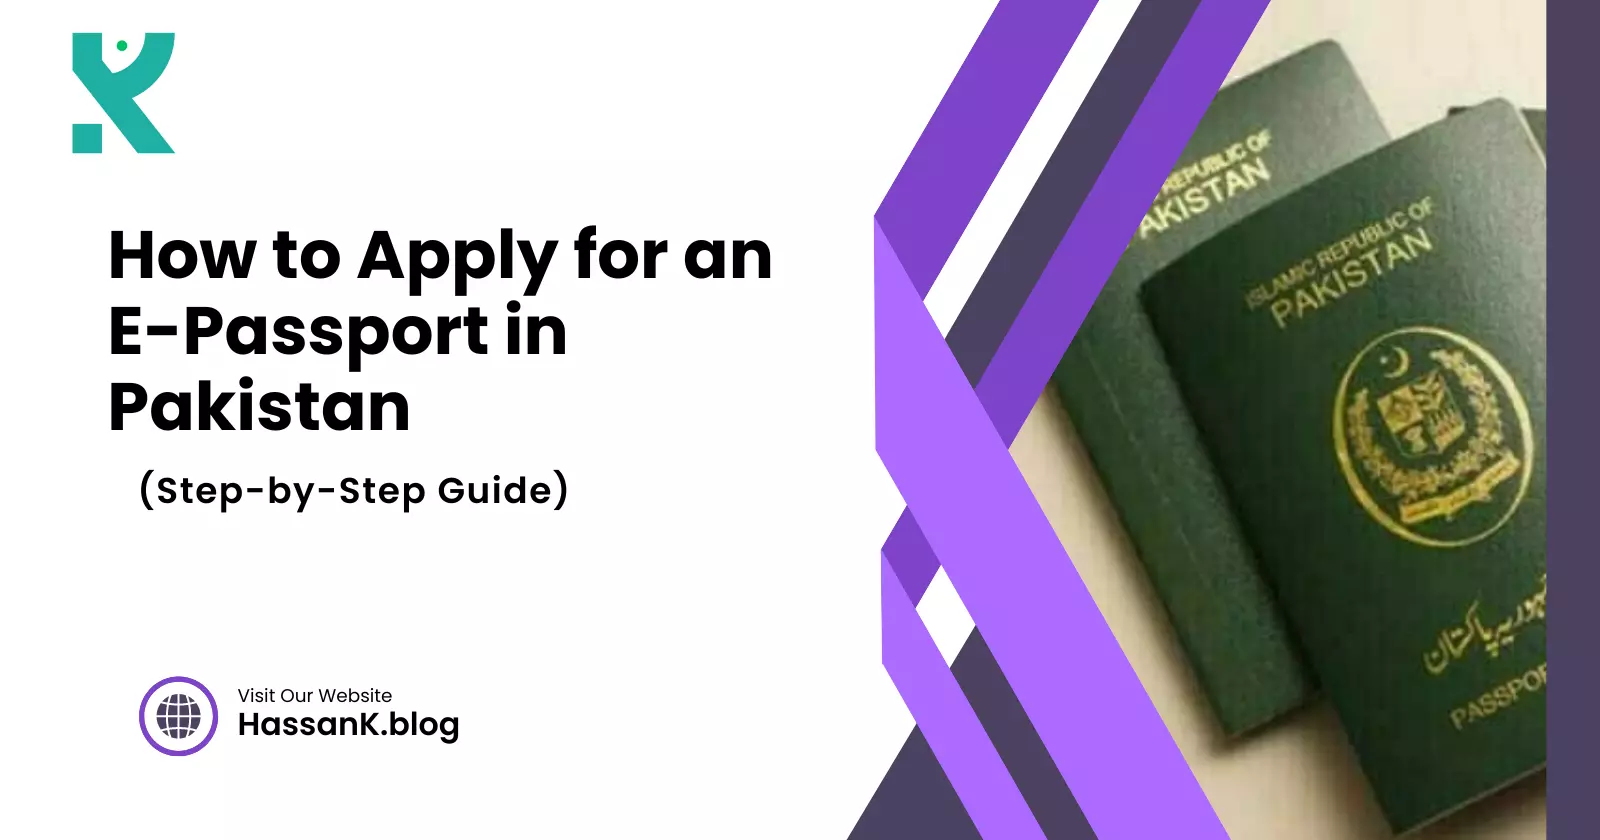 How to Apply for an E-Passport in Pakistan (Step-by-Step Guide)